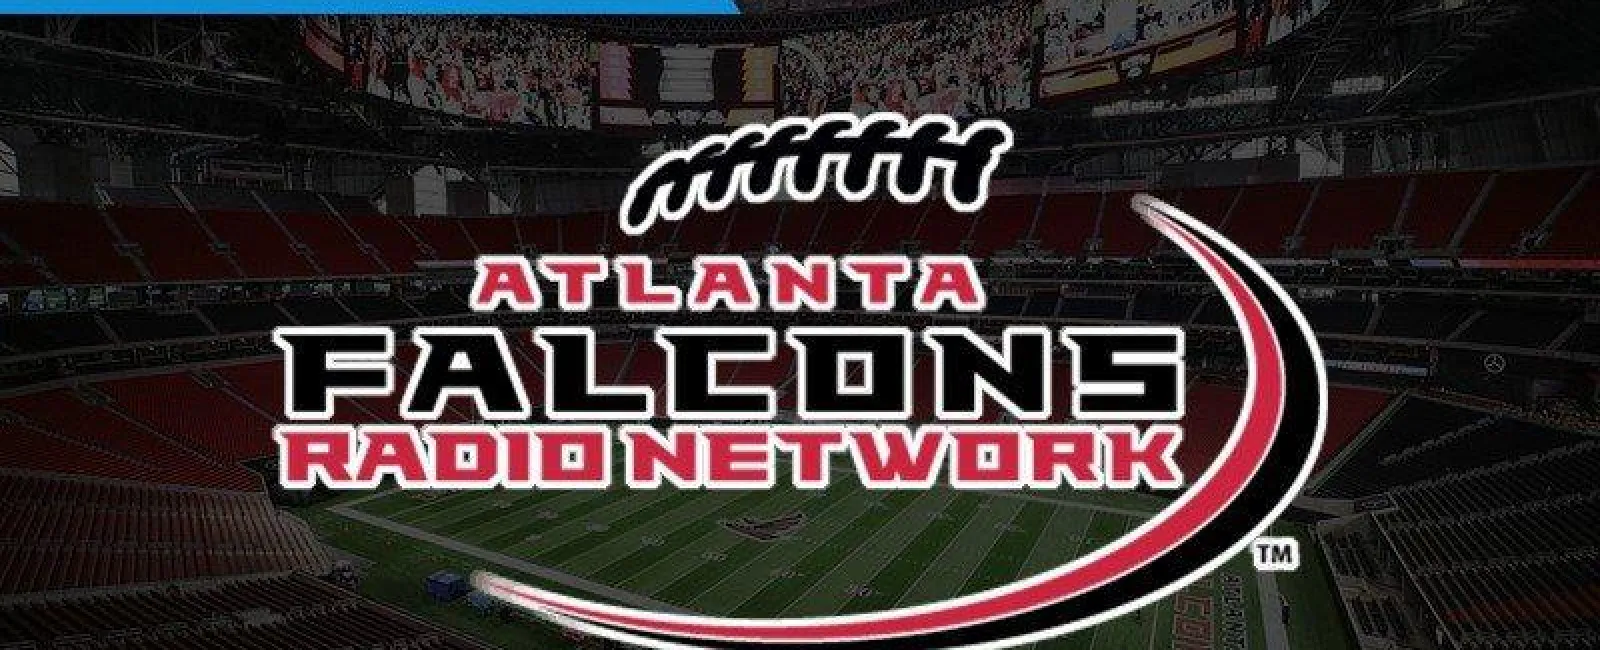 The Official Security of Atlanta Falcons Radio Network is Ackerman Security